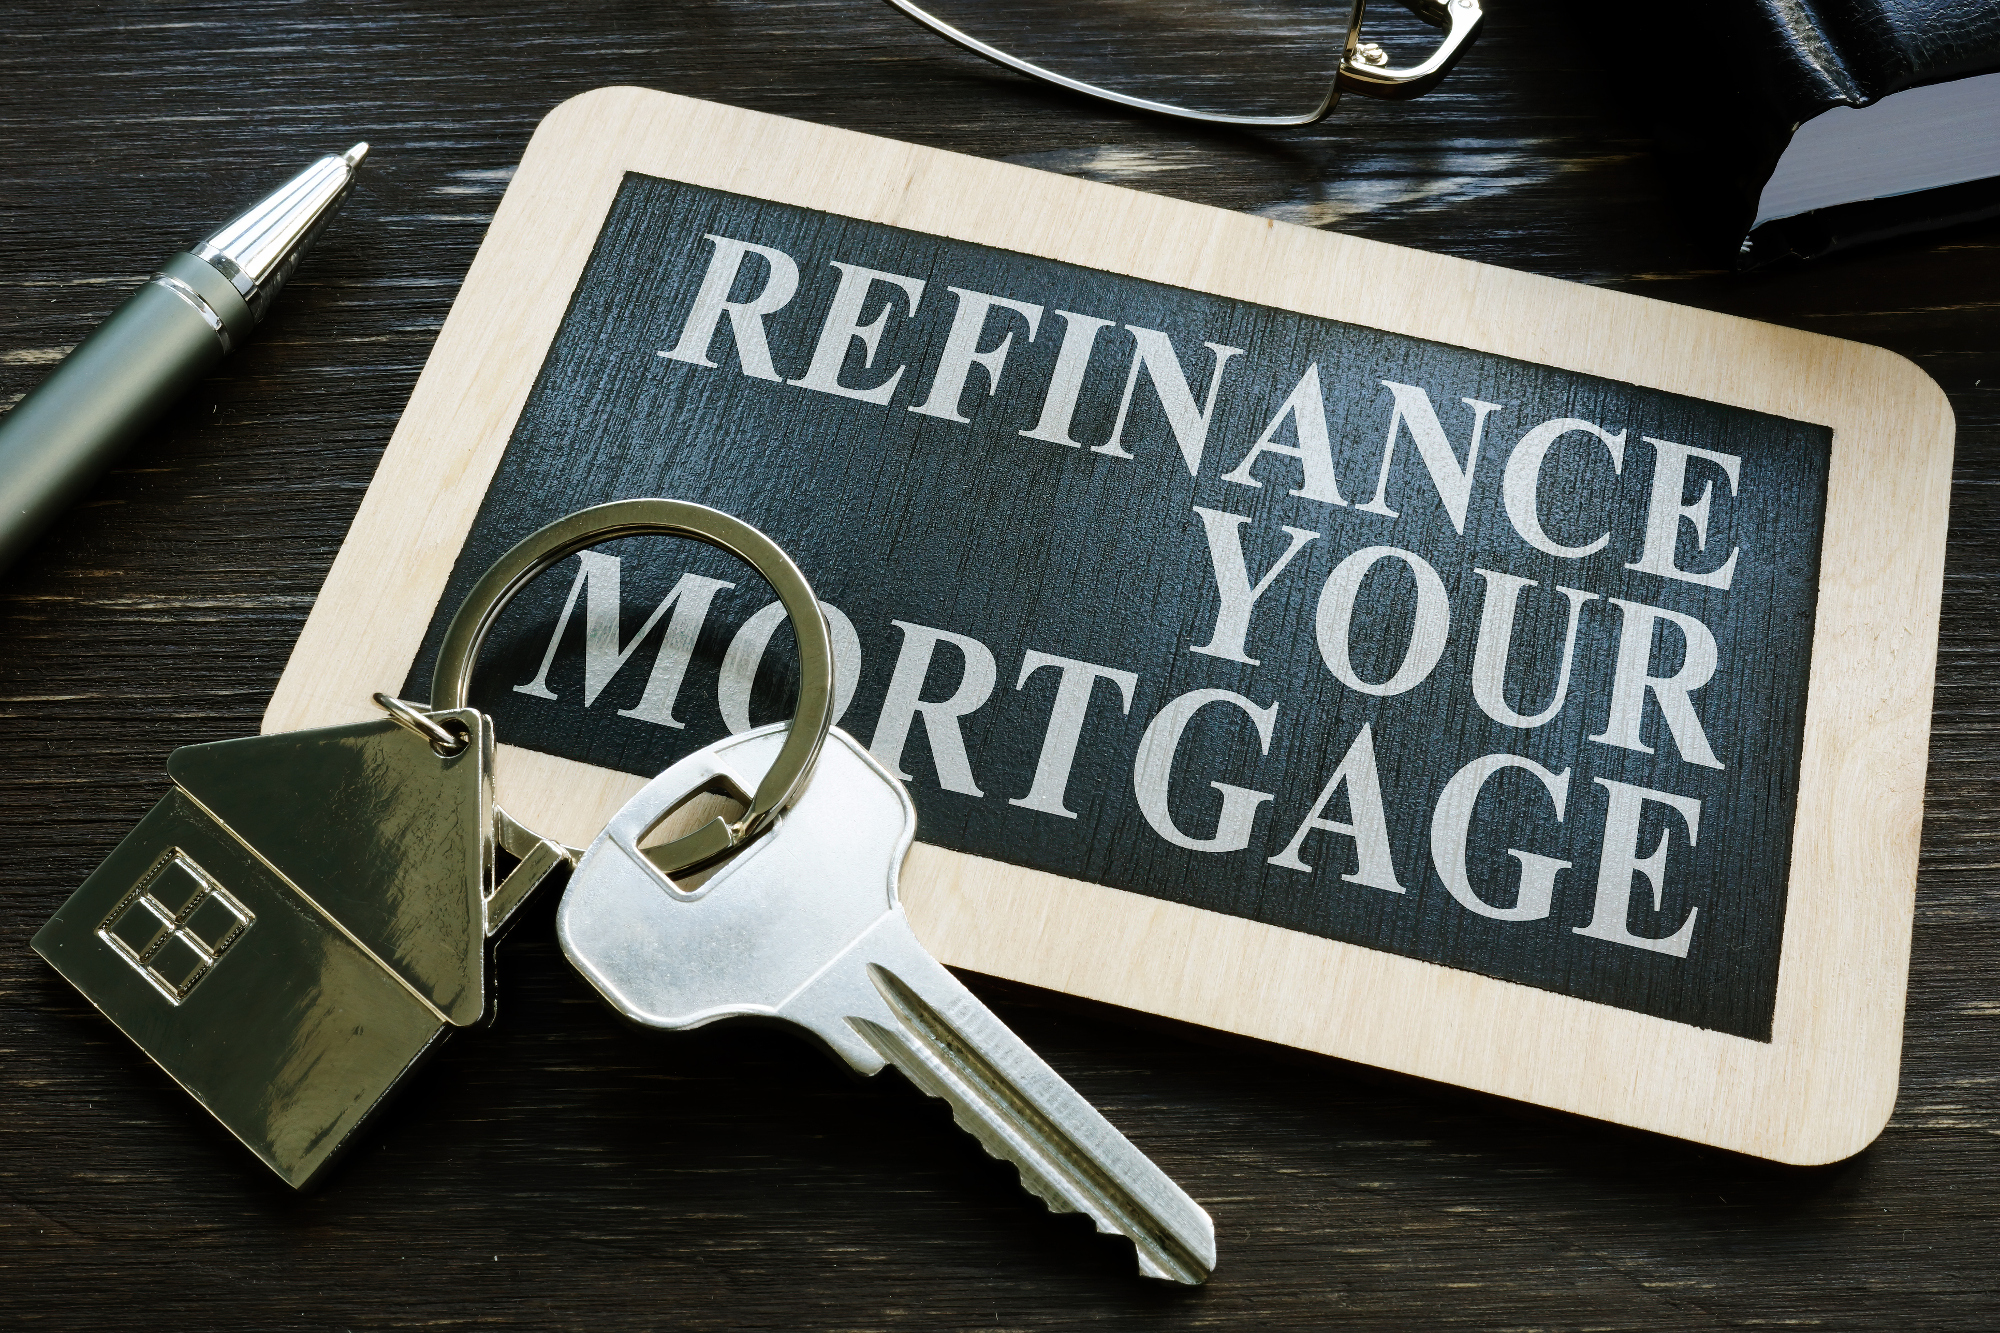 Refinance your mortgage word on the small blackboard.